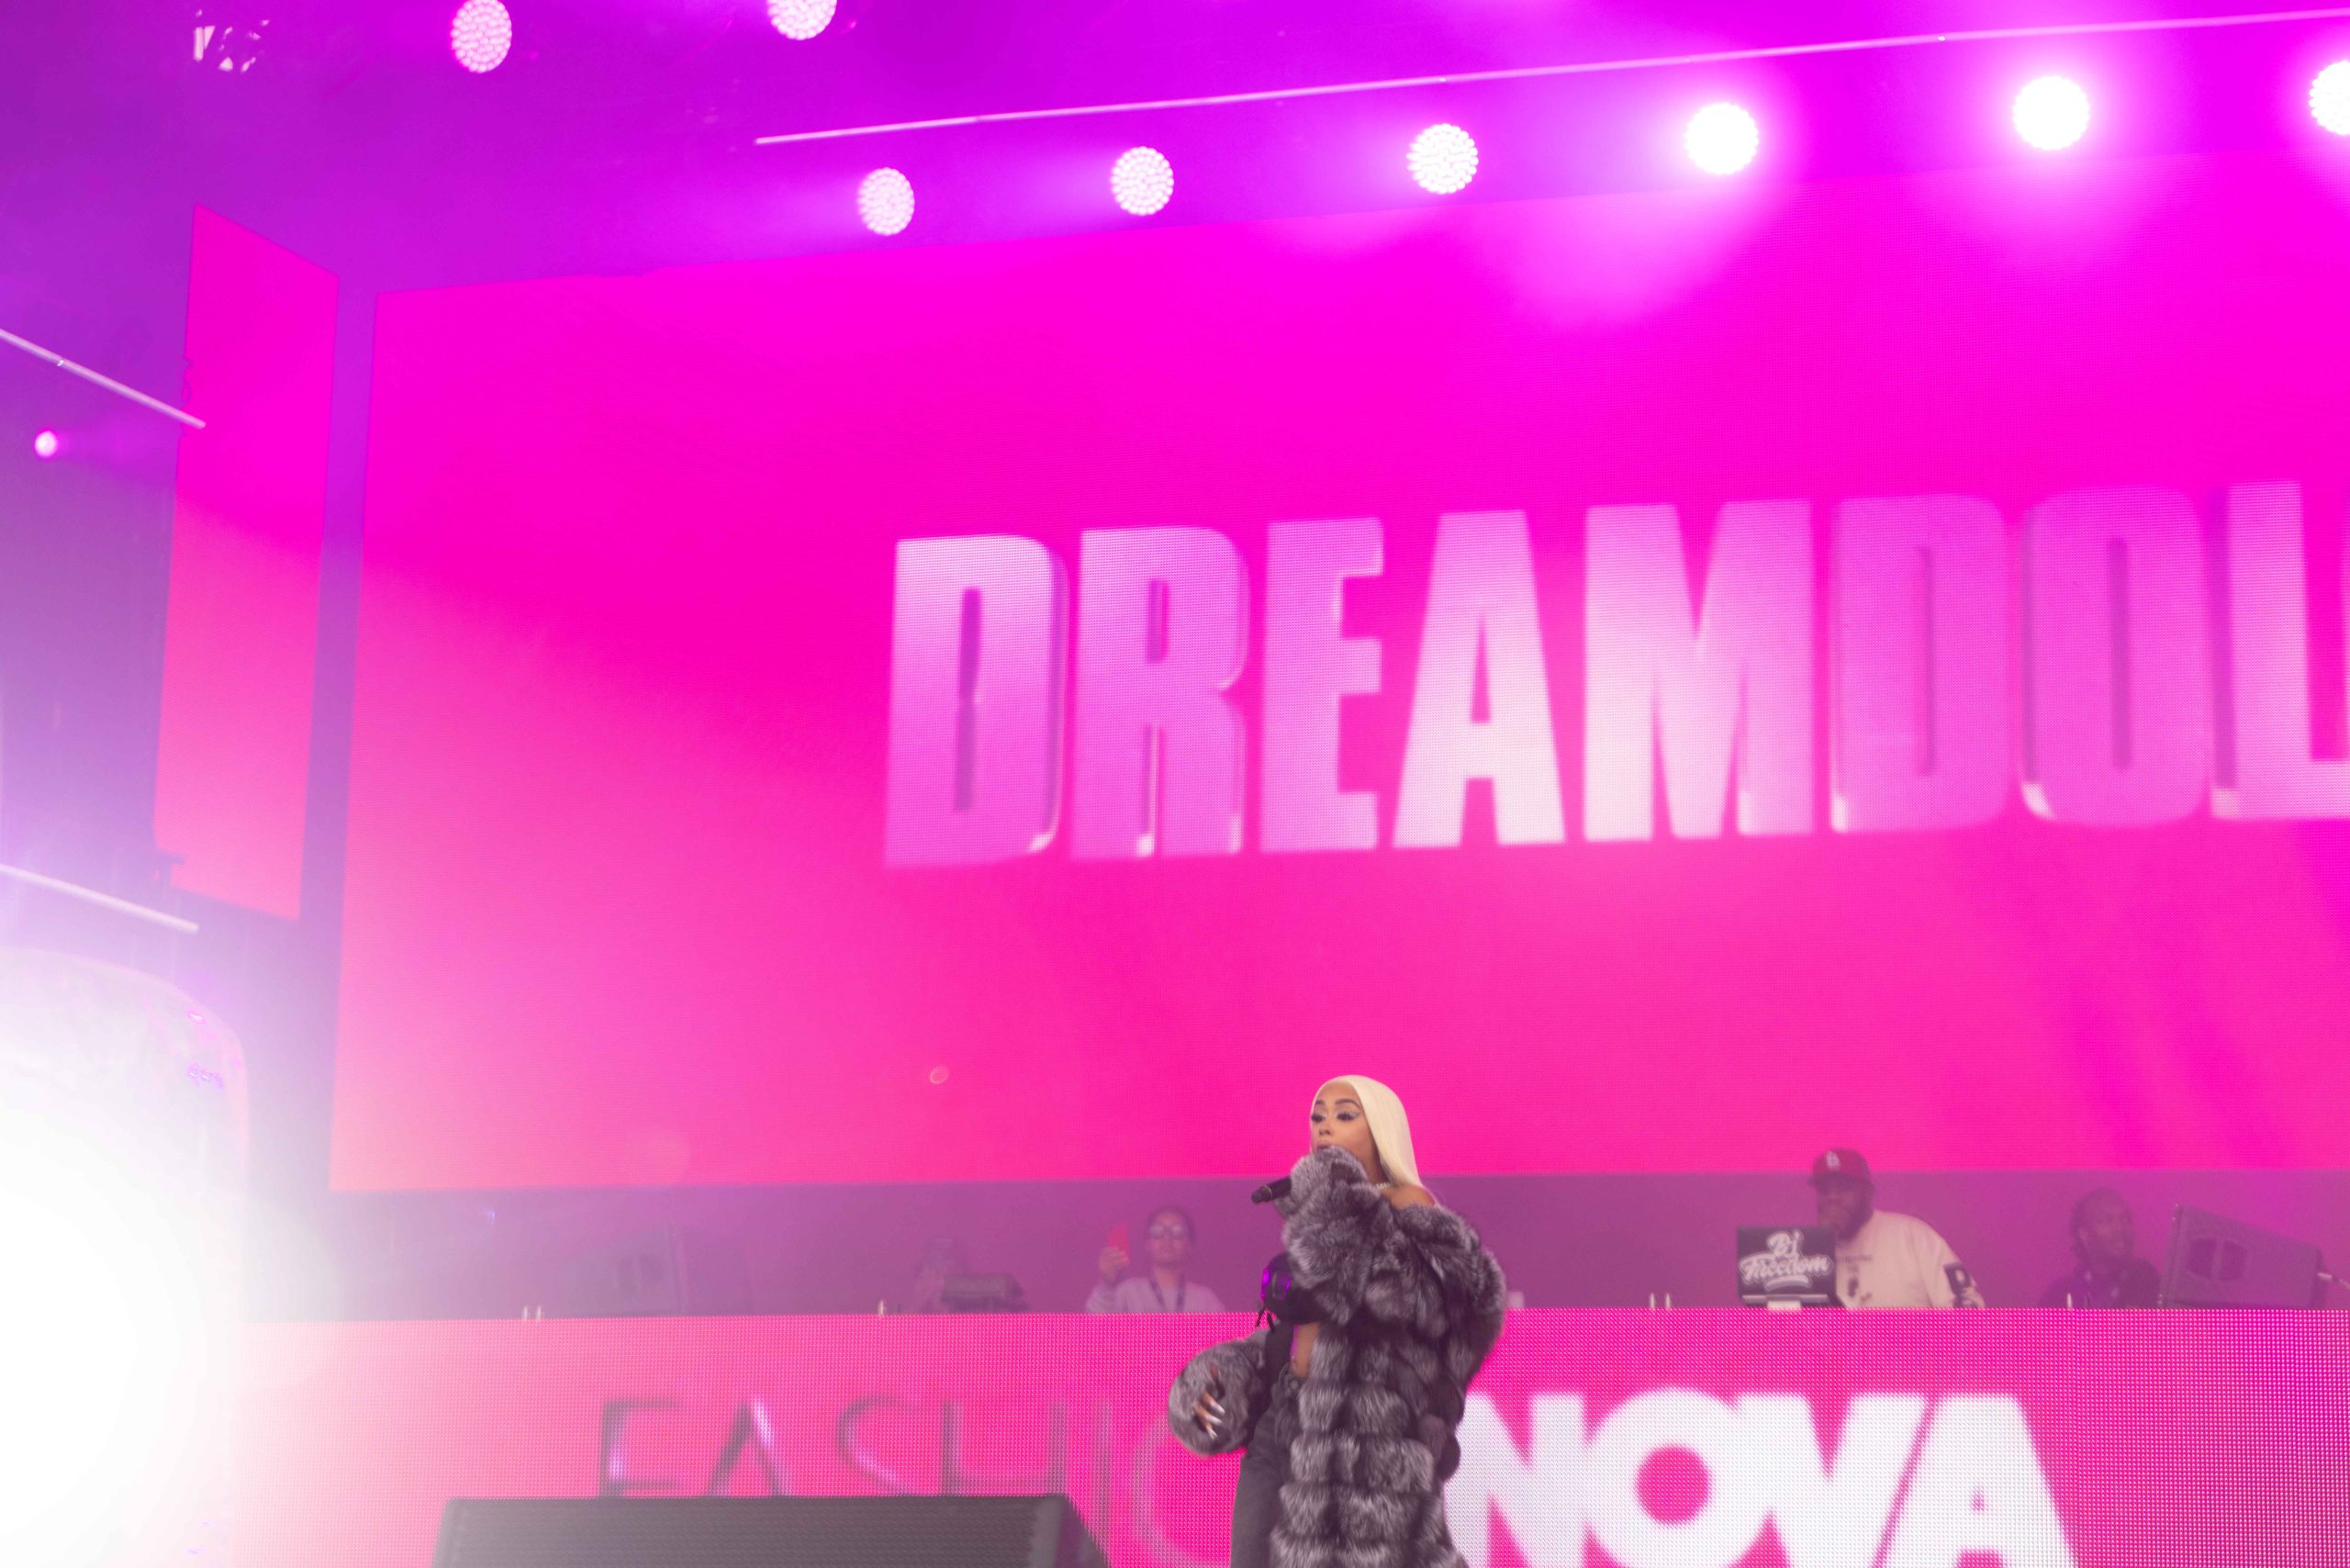 Dream Doll performs at the Fashion Nova Stage at Rolling Loud New York 2022 at Citi Field in Queens, New York on Sunday, September 25. PHOTO CREDIT: Meraki House for Fashion Nova